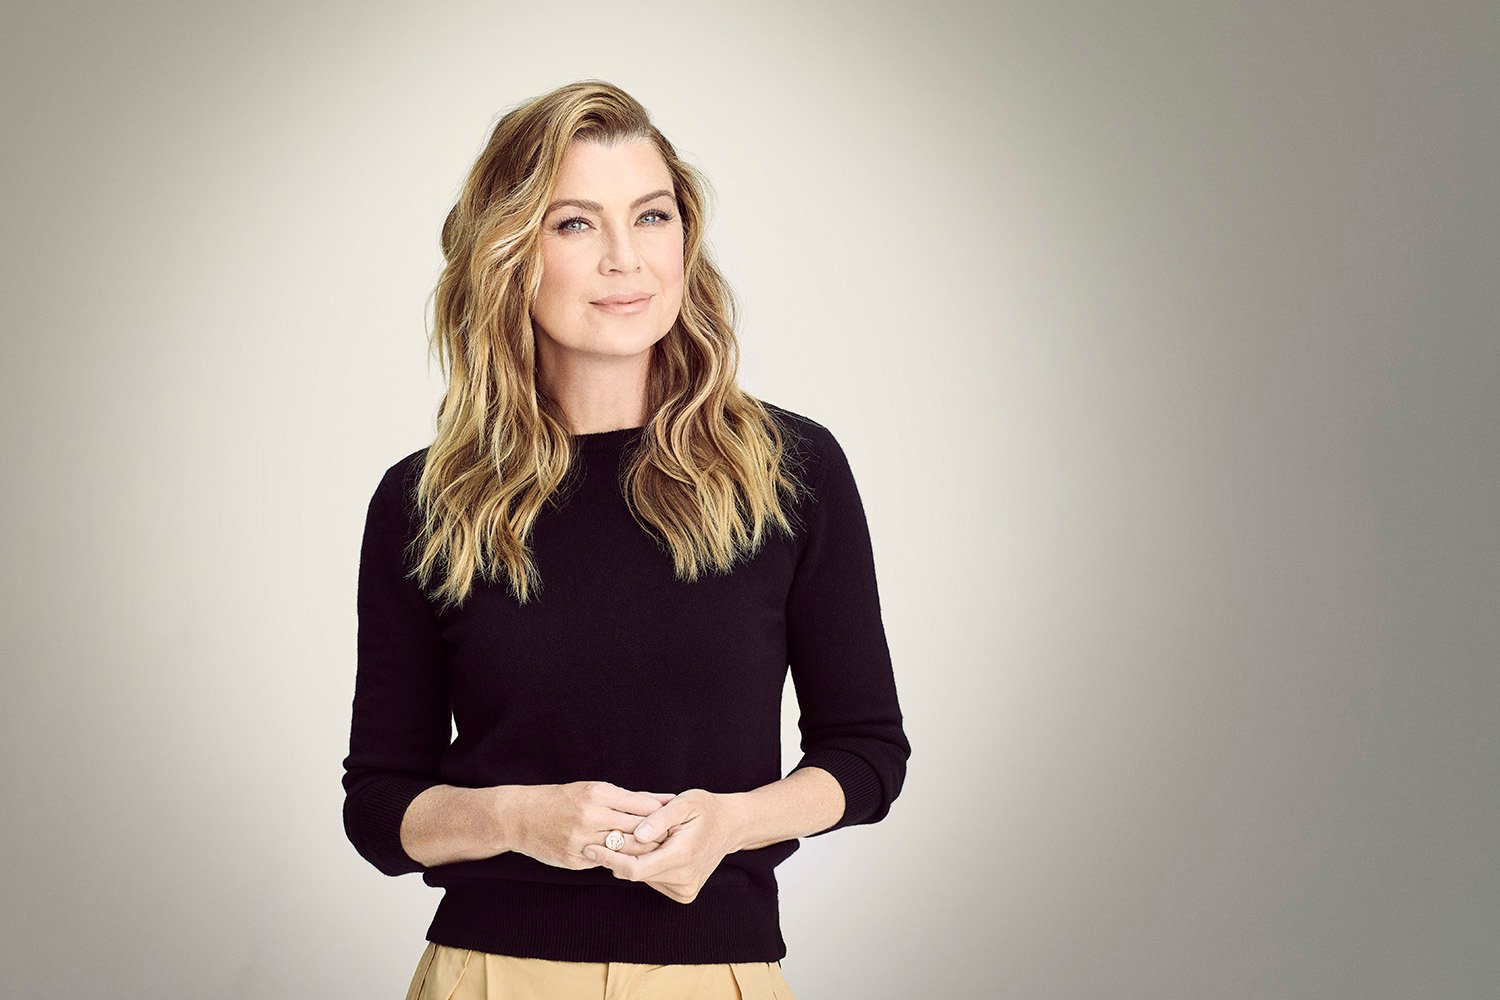 'Grey's Anatomy' star Ellen Pompeo, who just started her own podcast. Her blonde hair is curled and she's wearing a black top.